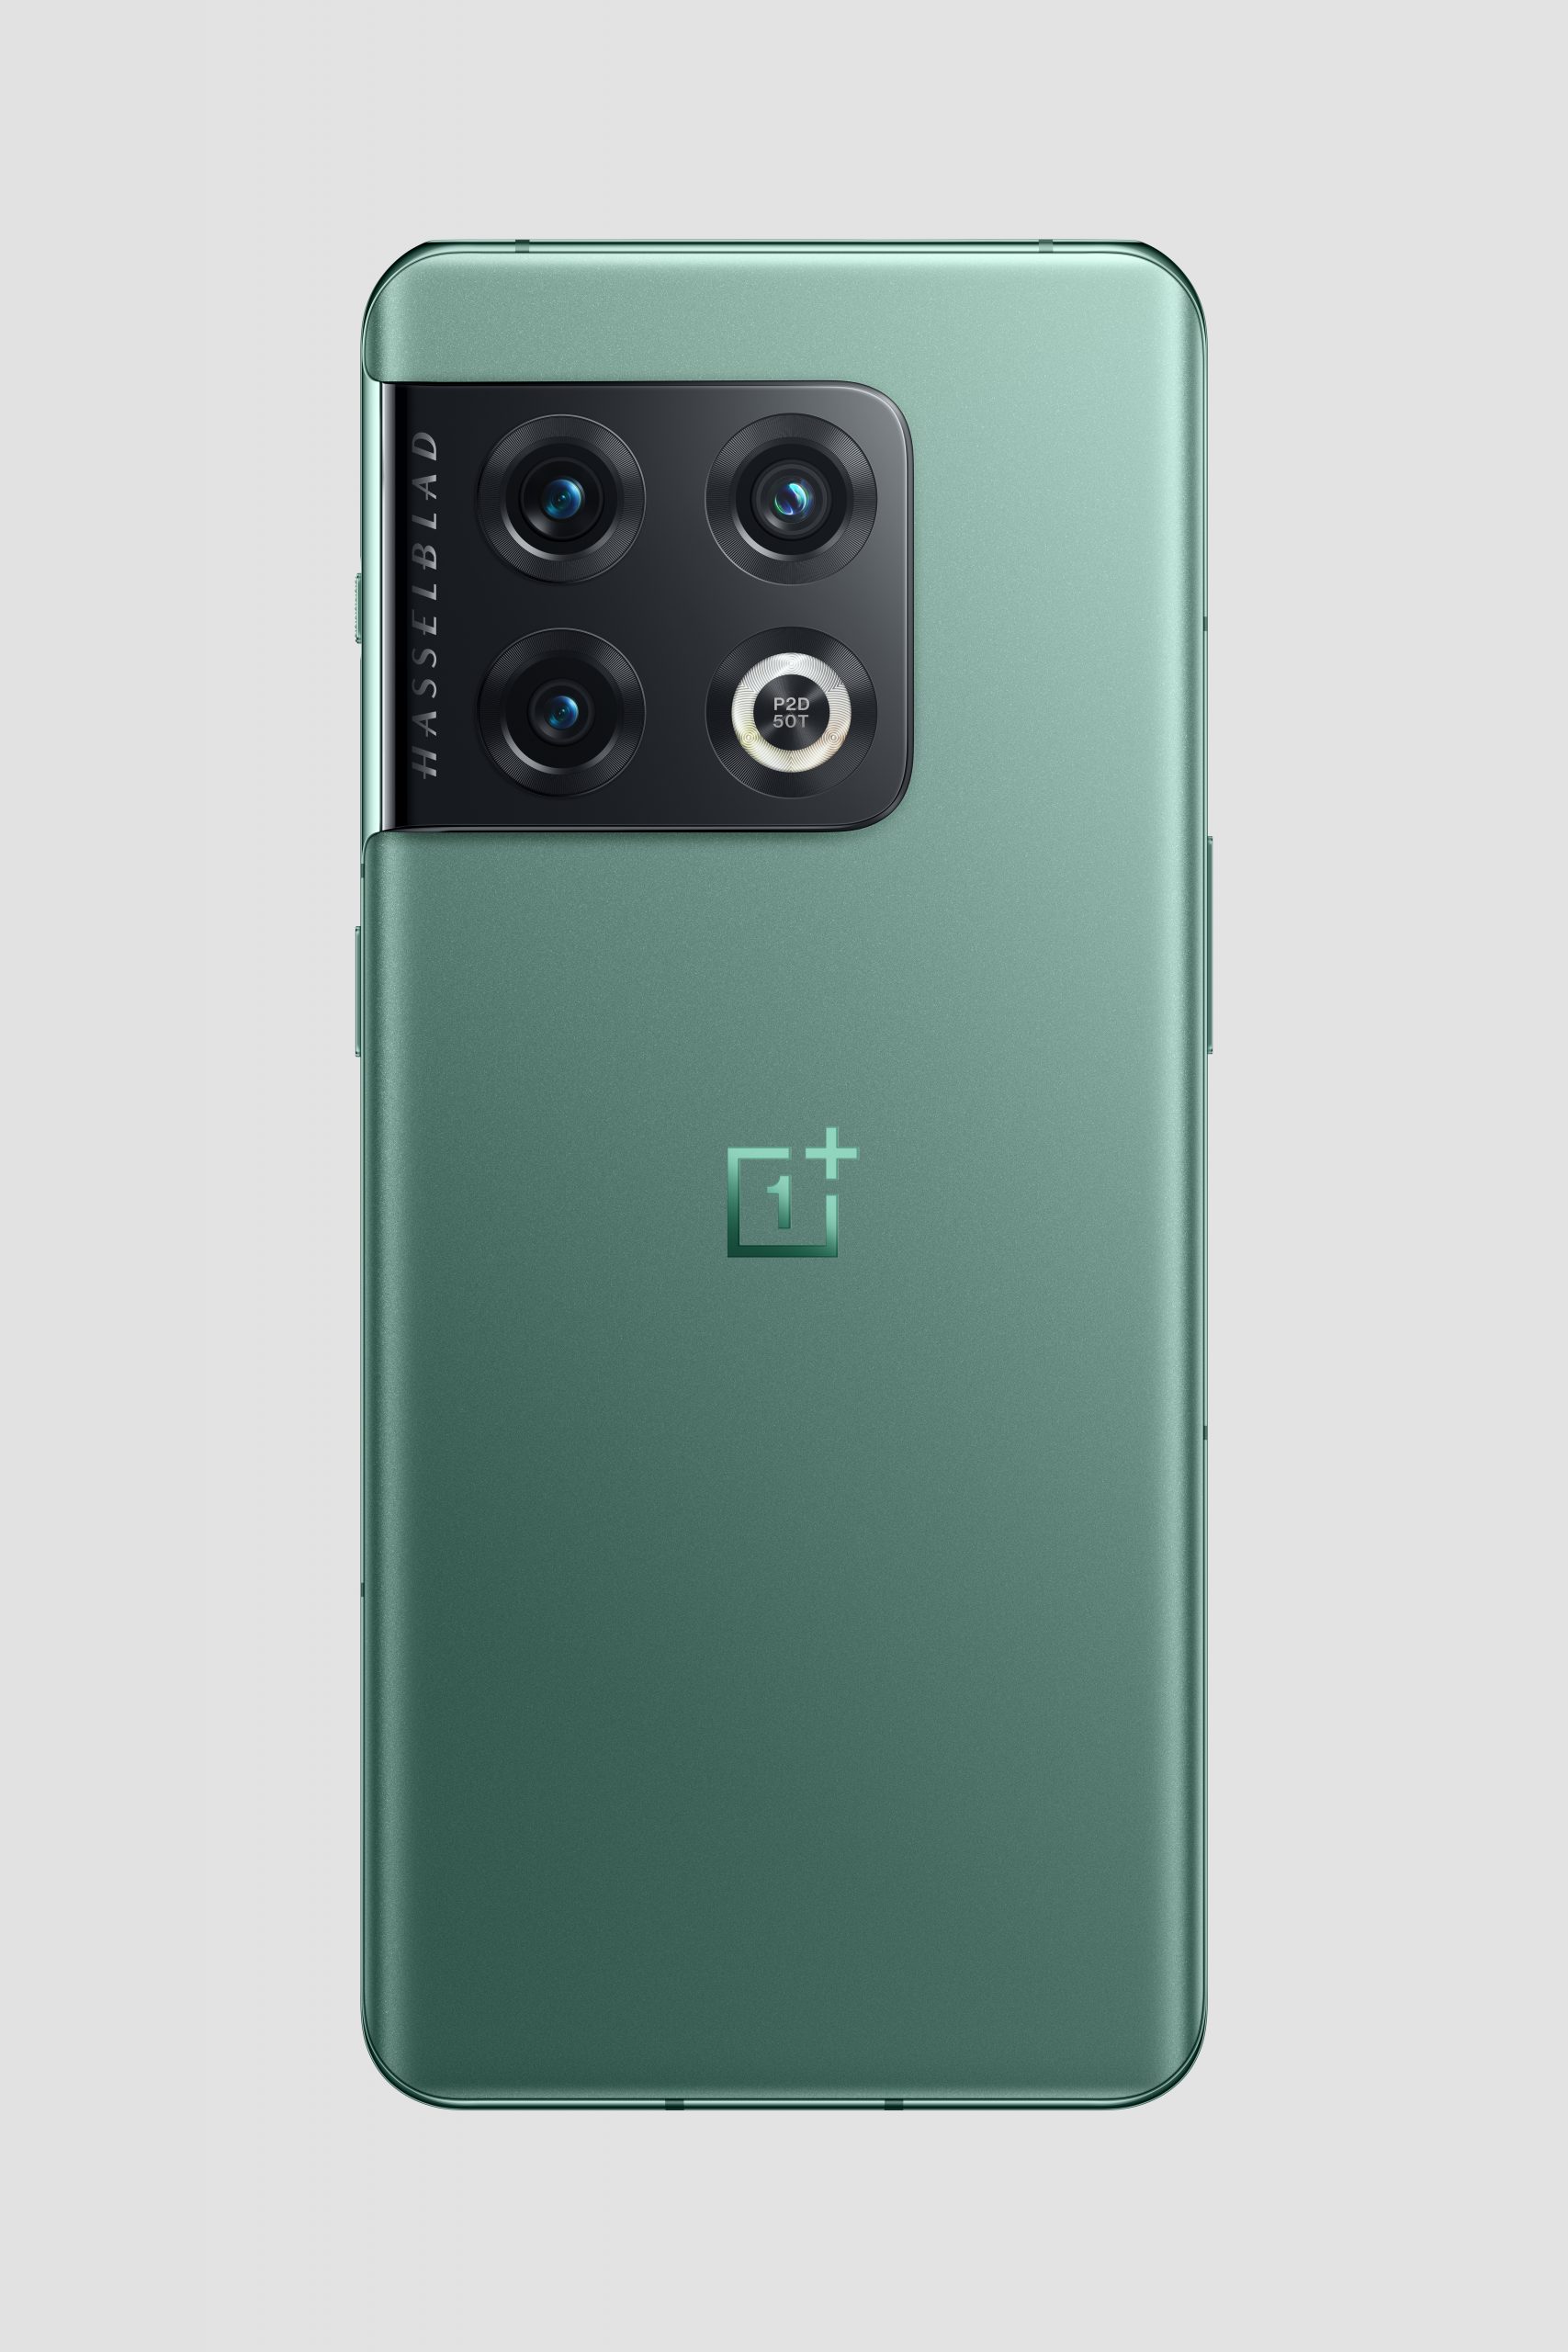 OnePlus 10 Pro in Emerald Forest